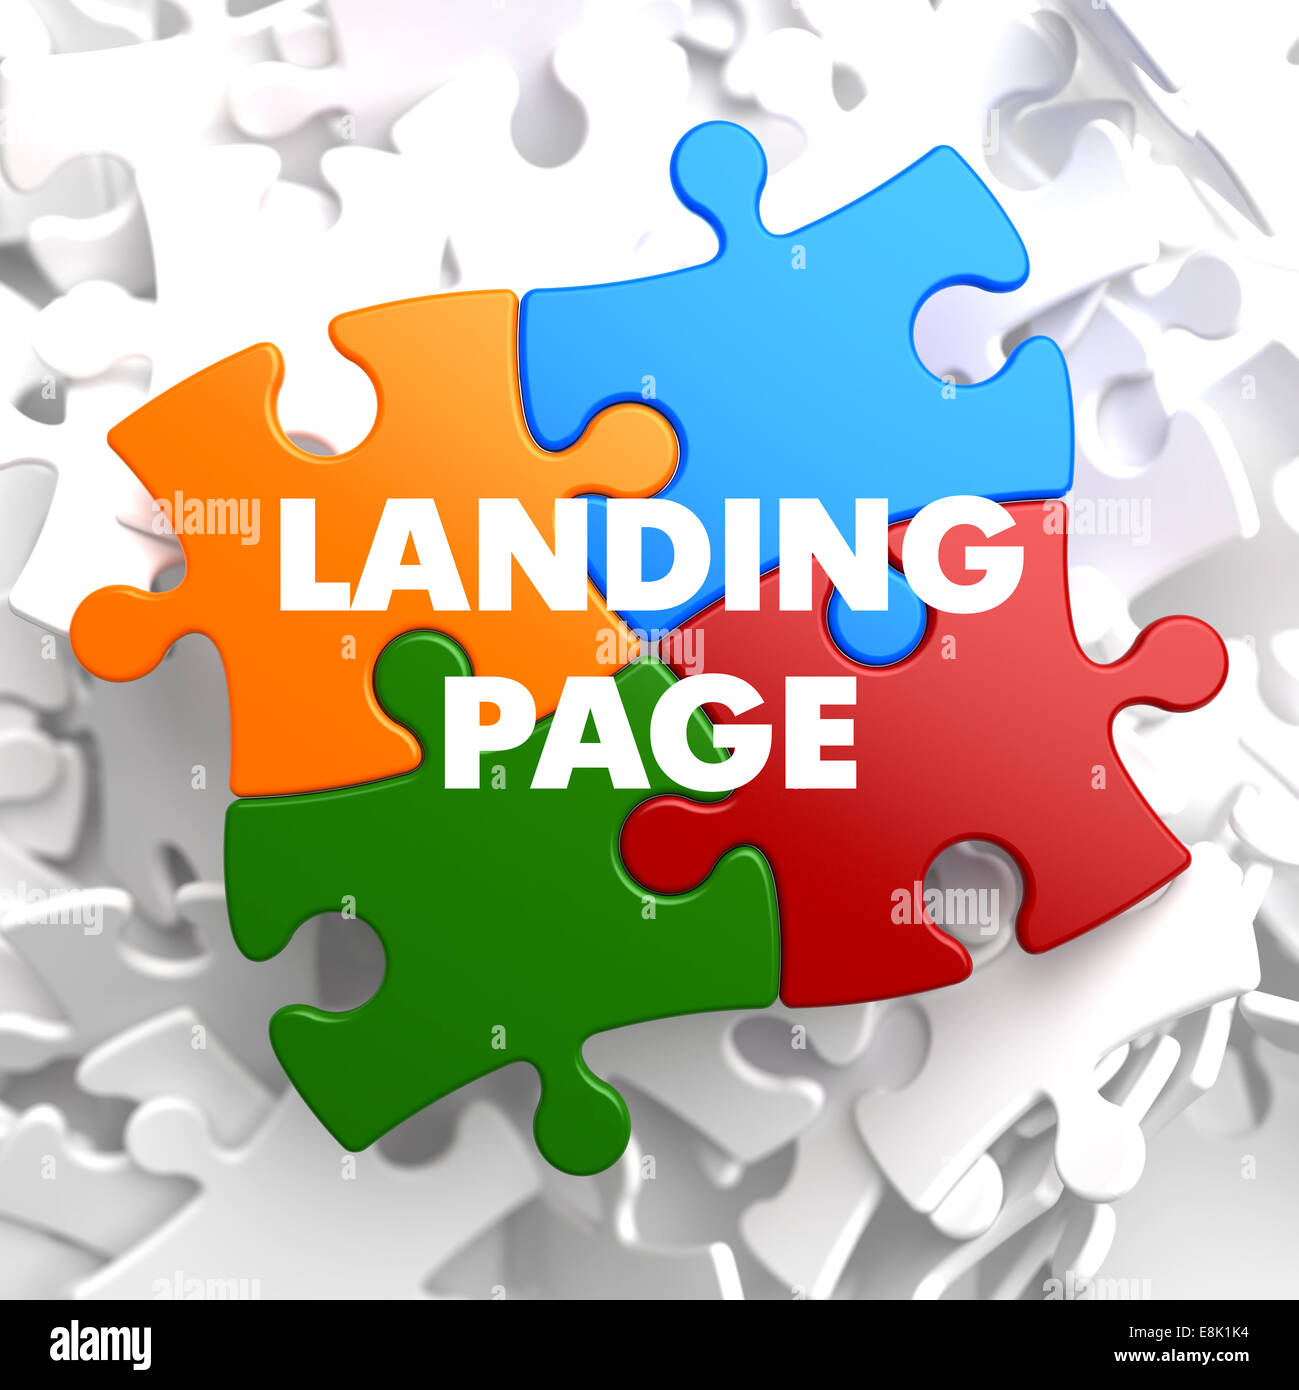 Landing Page on Multicolor Puzzle. Stock Photo